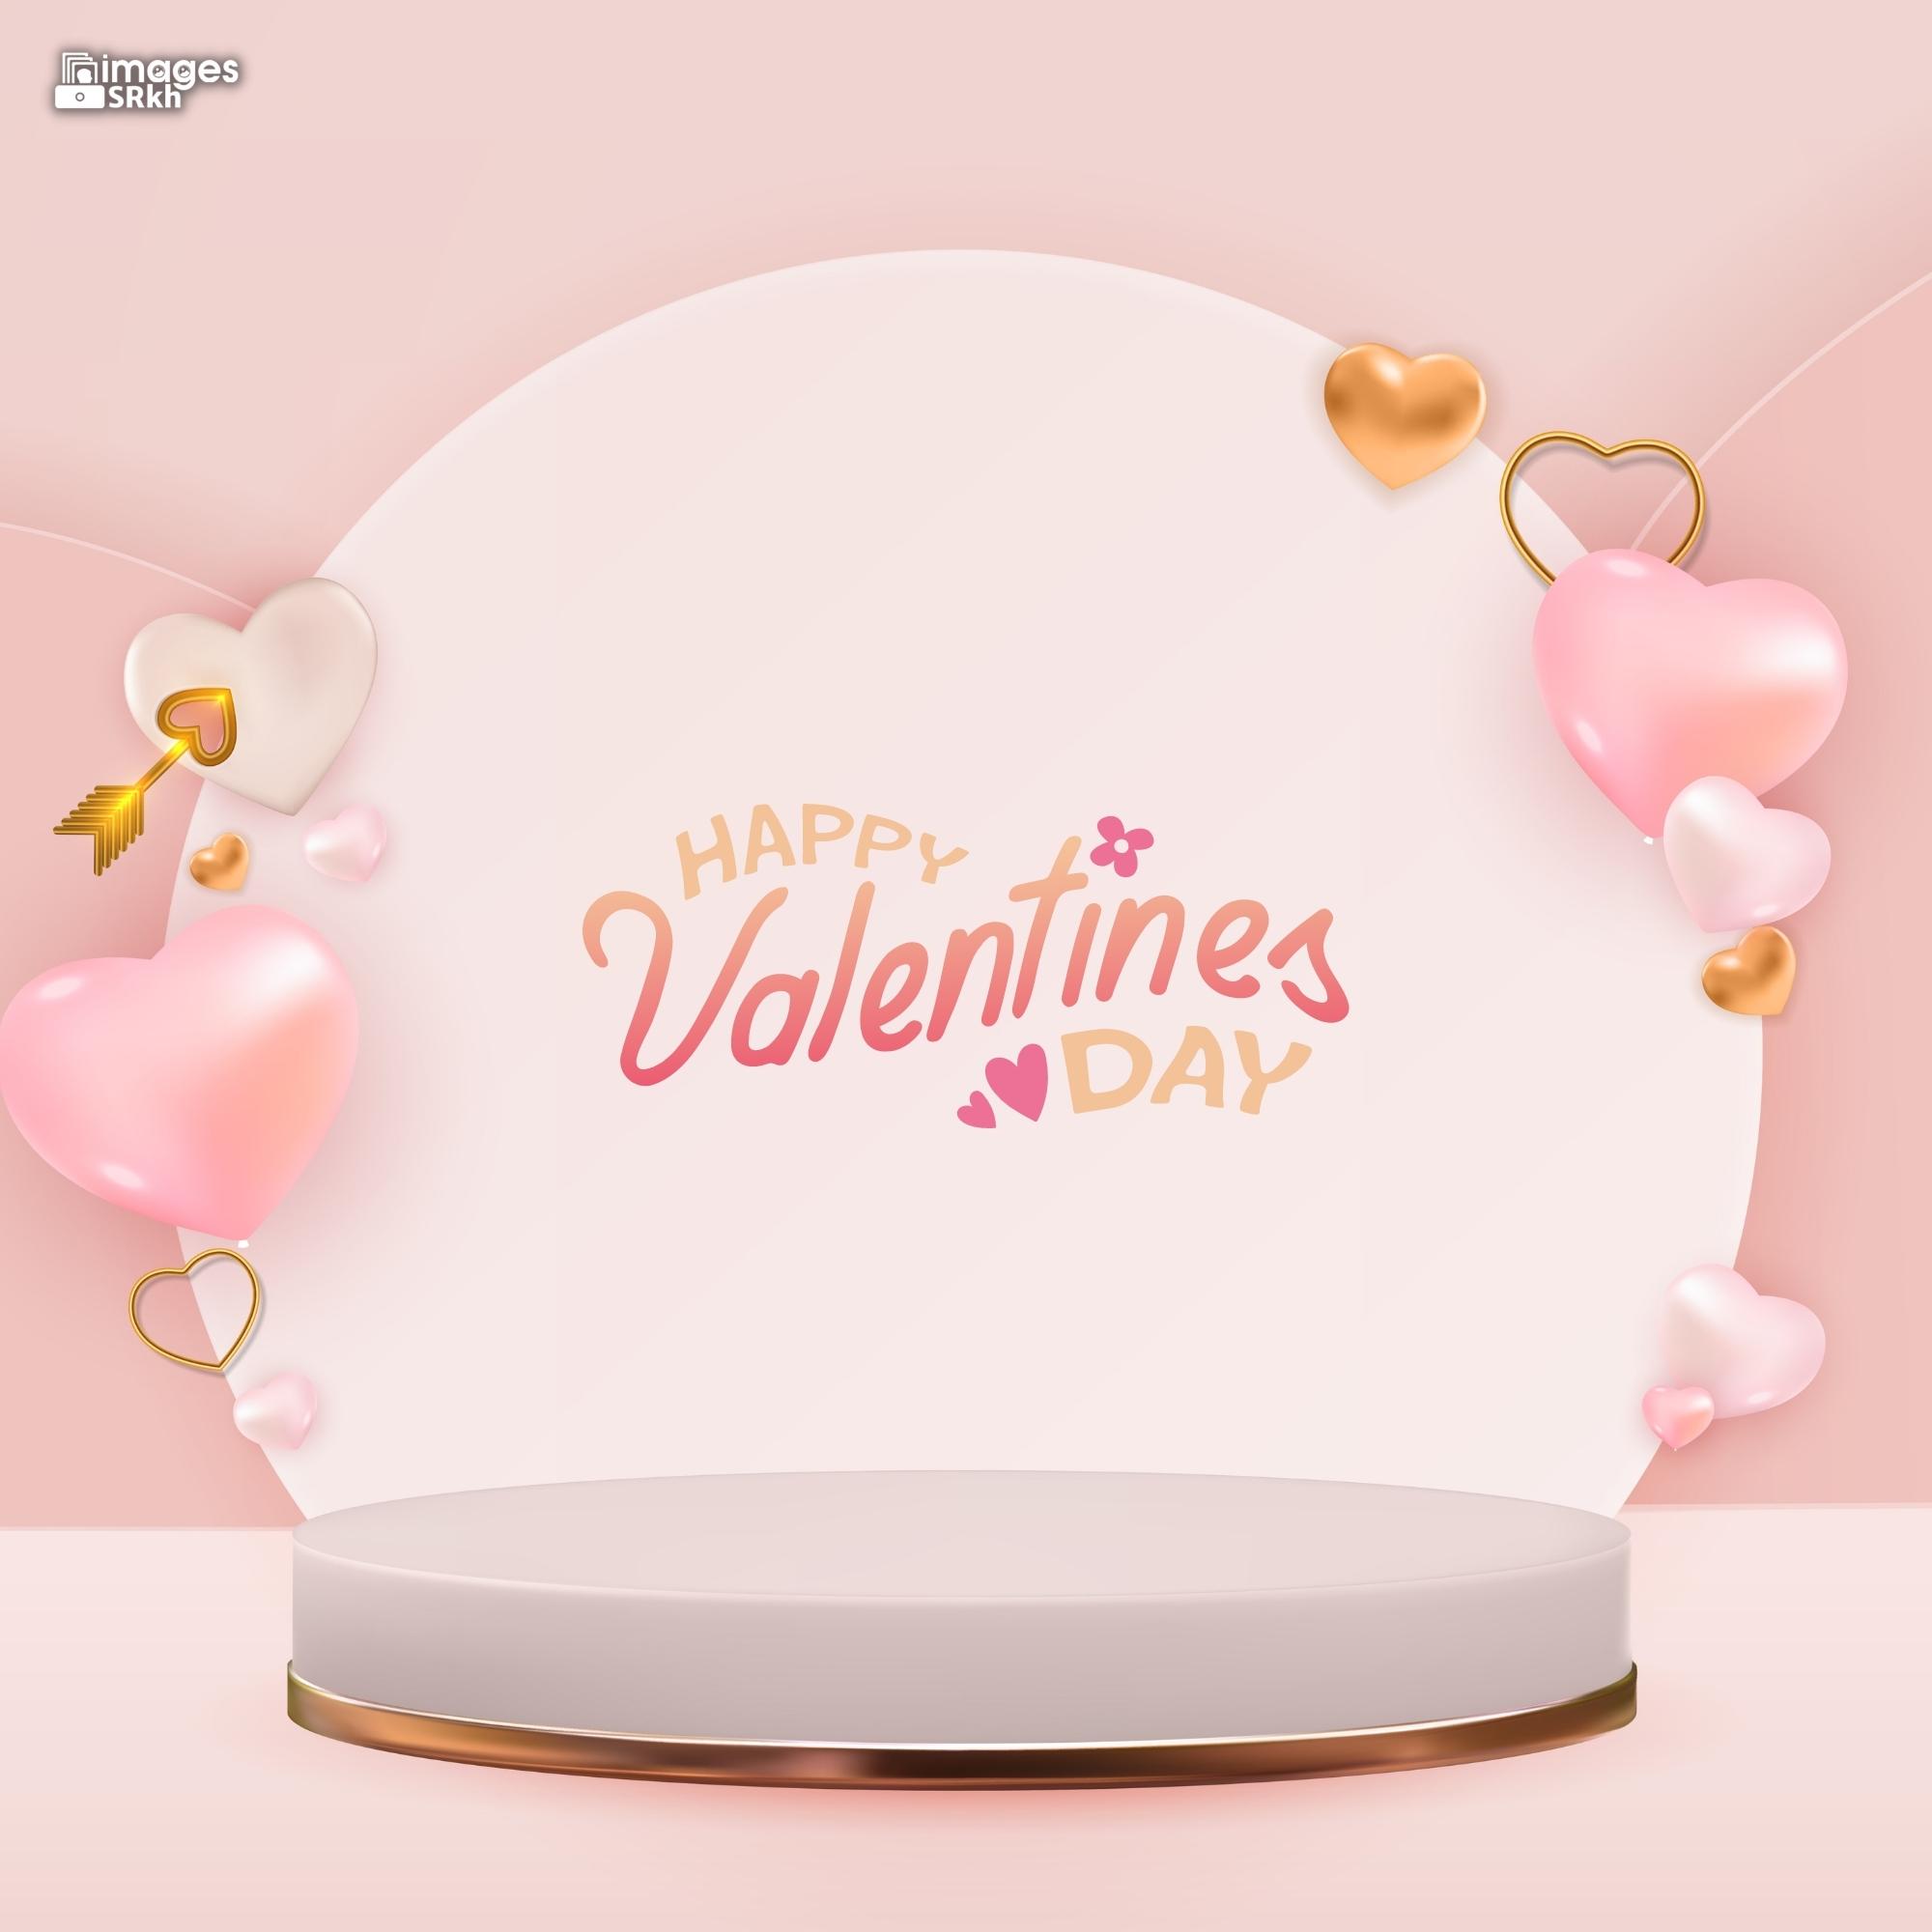 Happy Valentines Day | 530 | PREMIUM IMAGES | Wishes for Love